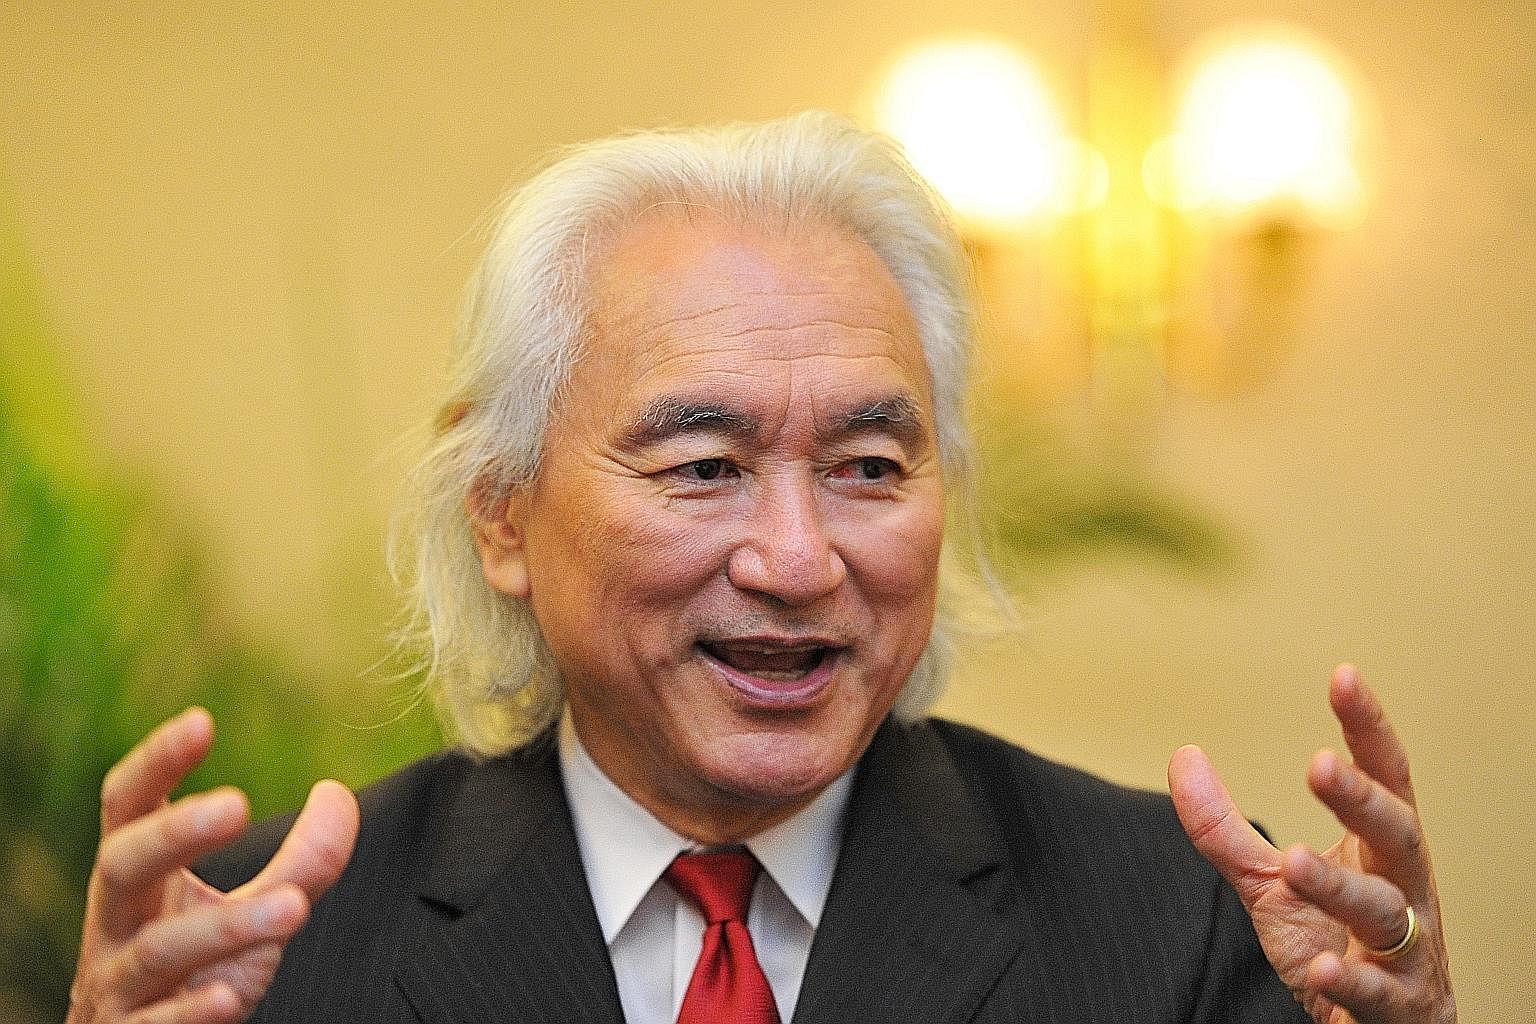 Prof Kaku says commodity capitalism will give way to IT-driven capitalism in the future, and in the brave new world, Singapore needs to focus on innovation.